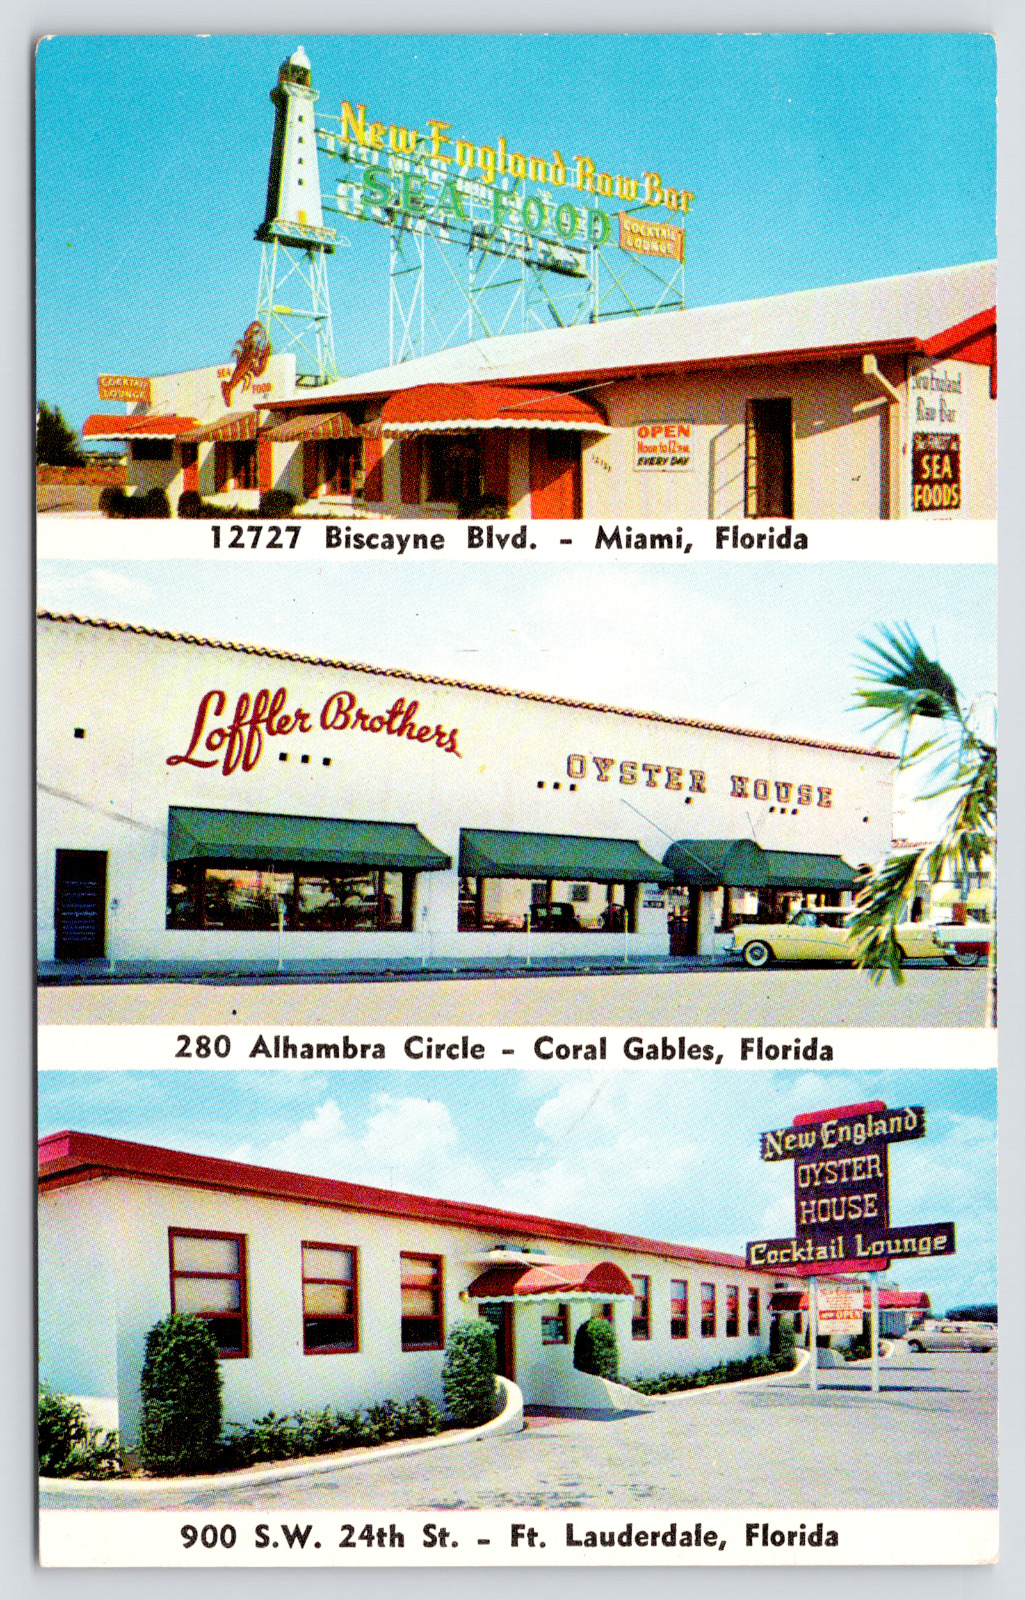 Postcard New England Oyster Houses Miami Coral Gables Ft. Lauderdale Florida